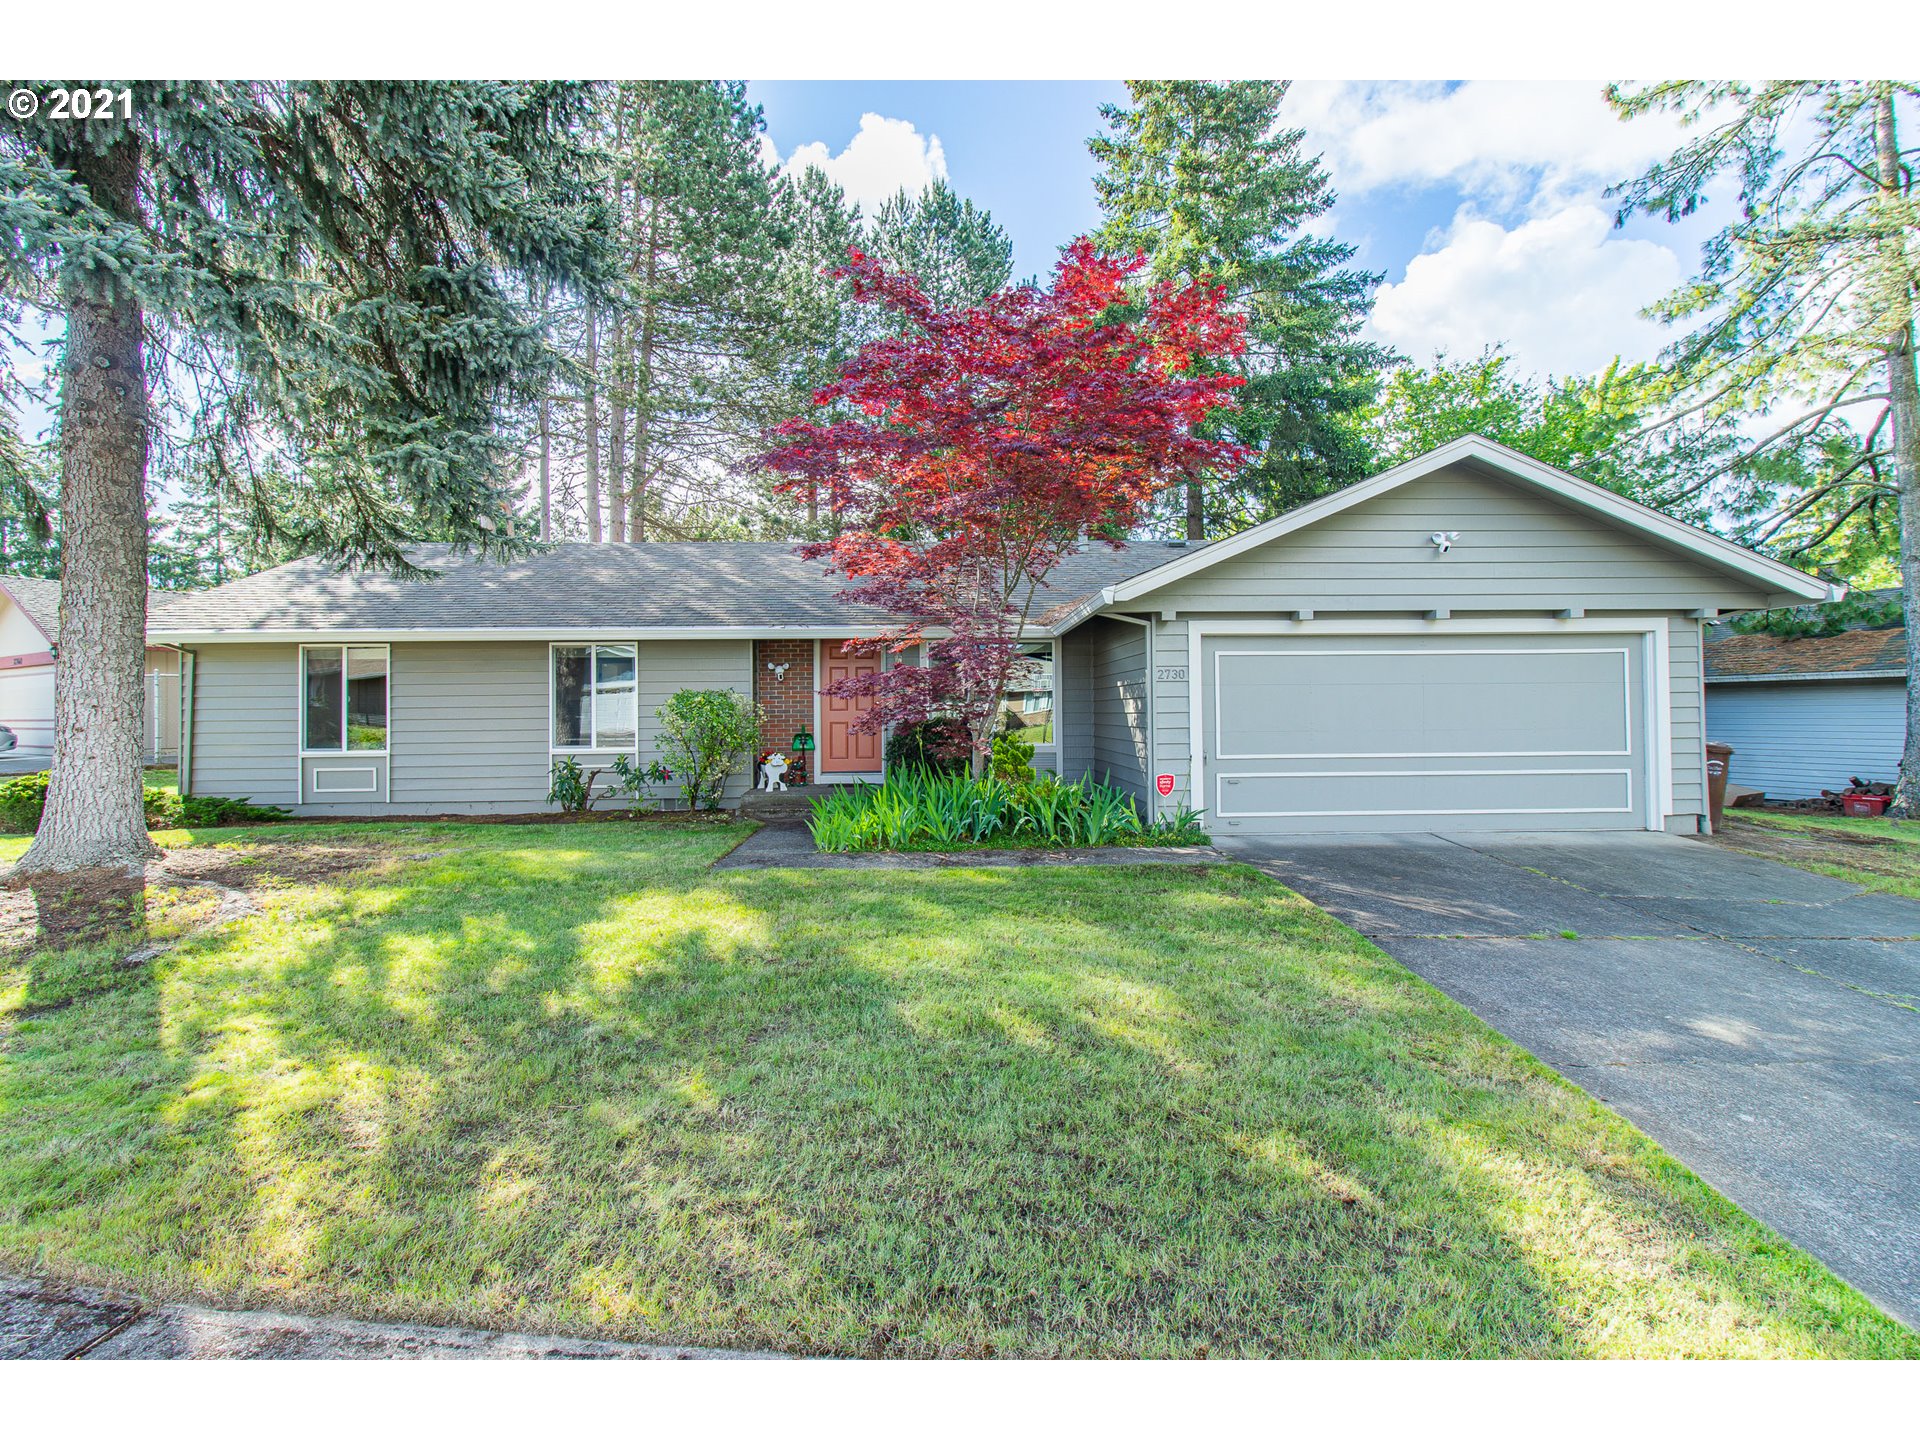 2730 NW AMITY LN (1 of 28)